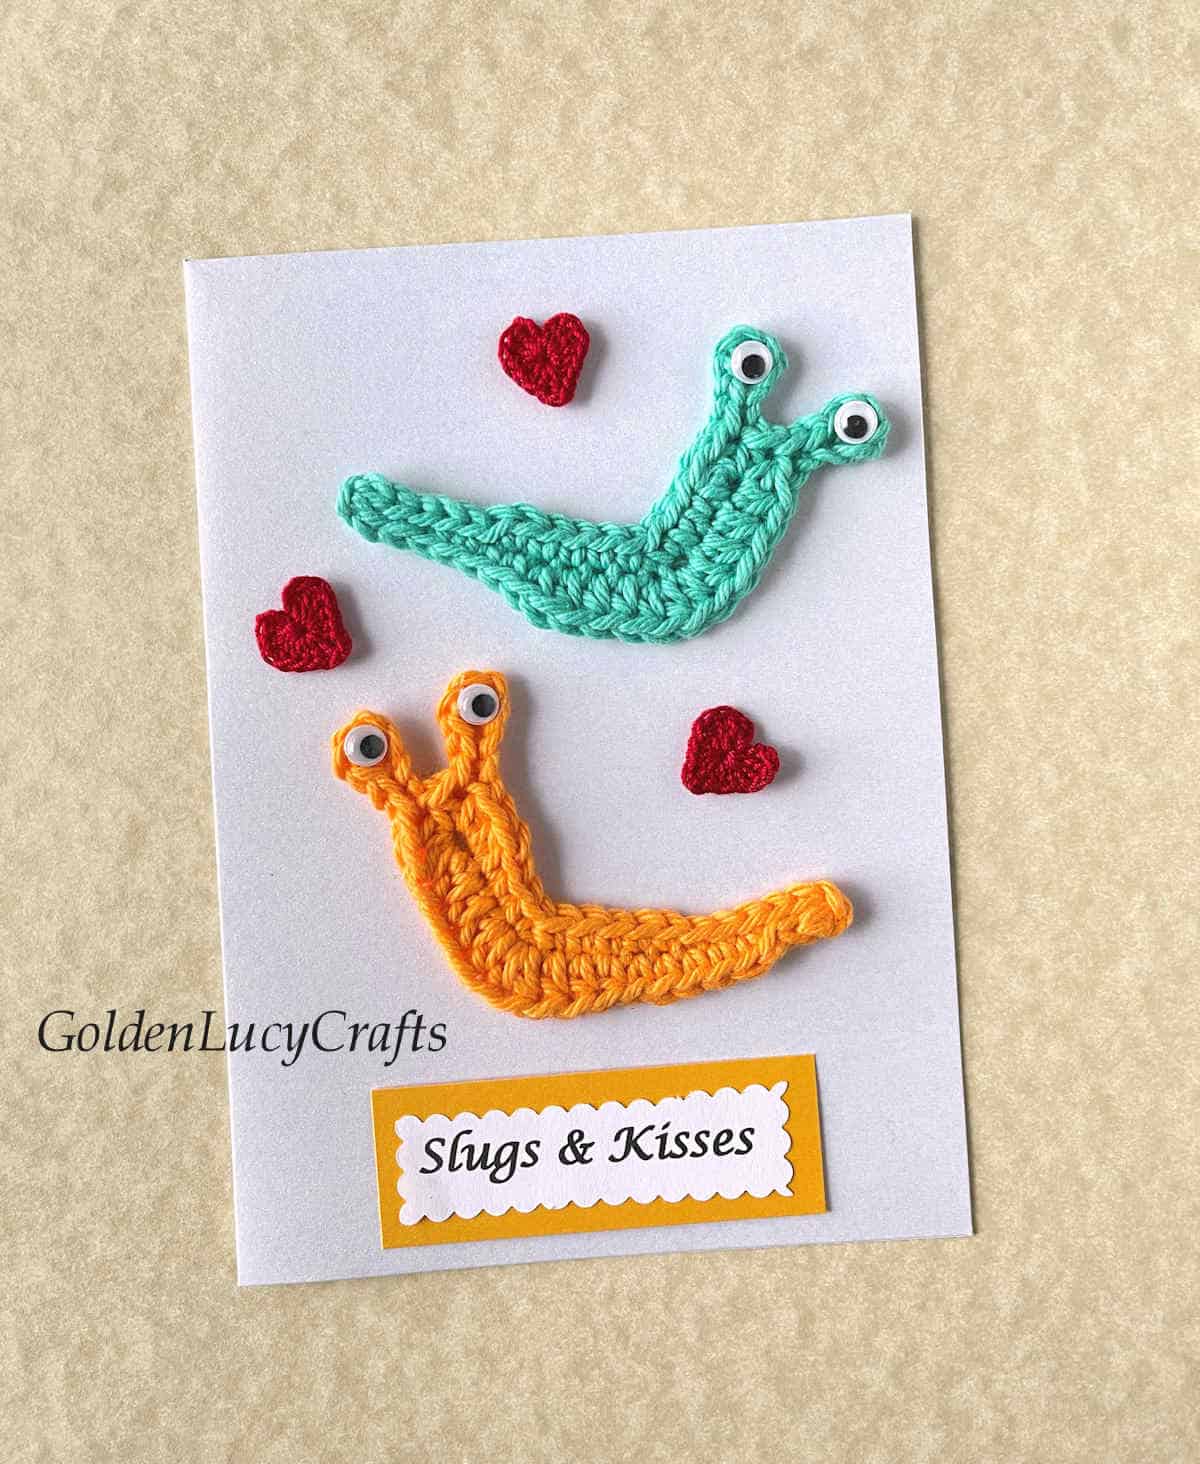 Greeting handmade card embellished with crochet slugs and hearts, note saying slugs and kisses.